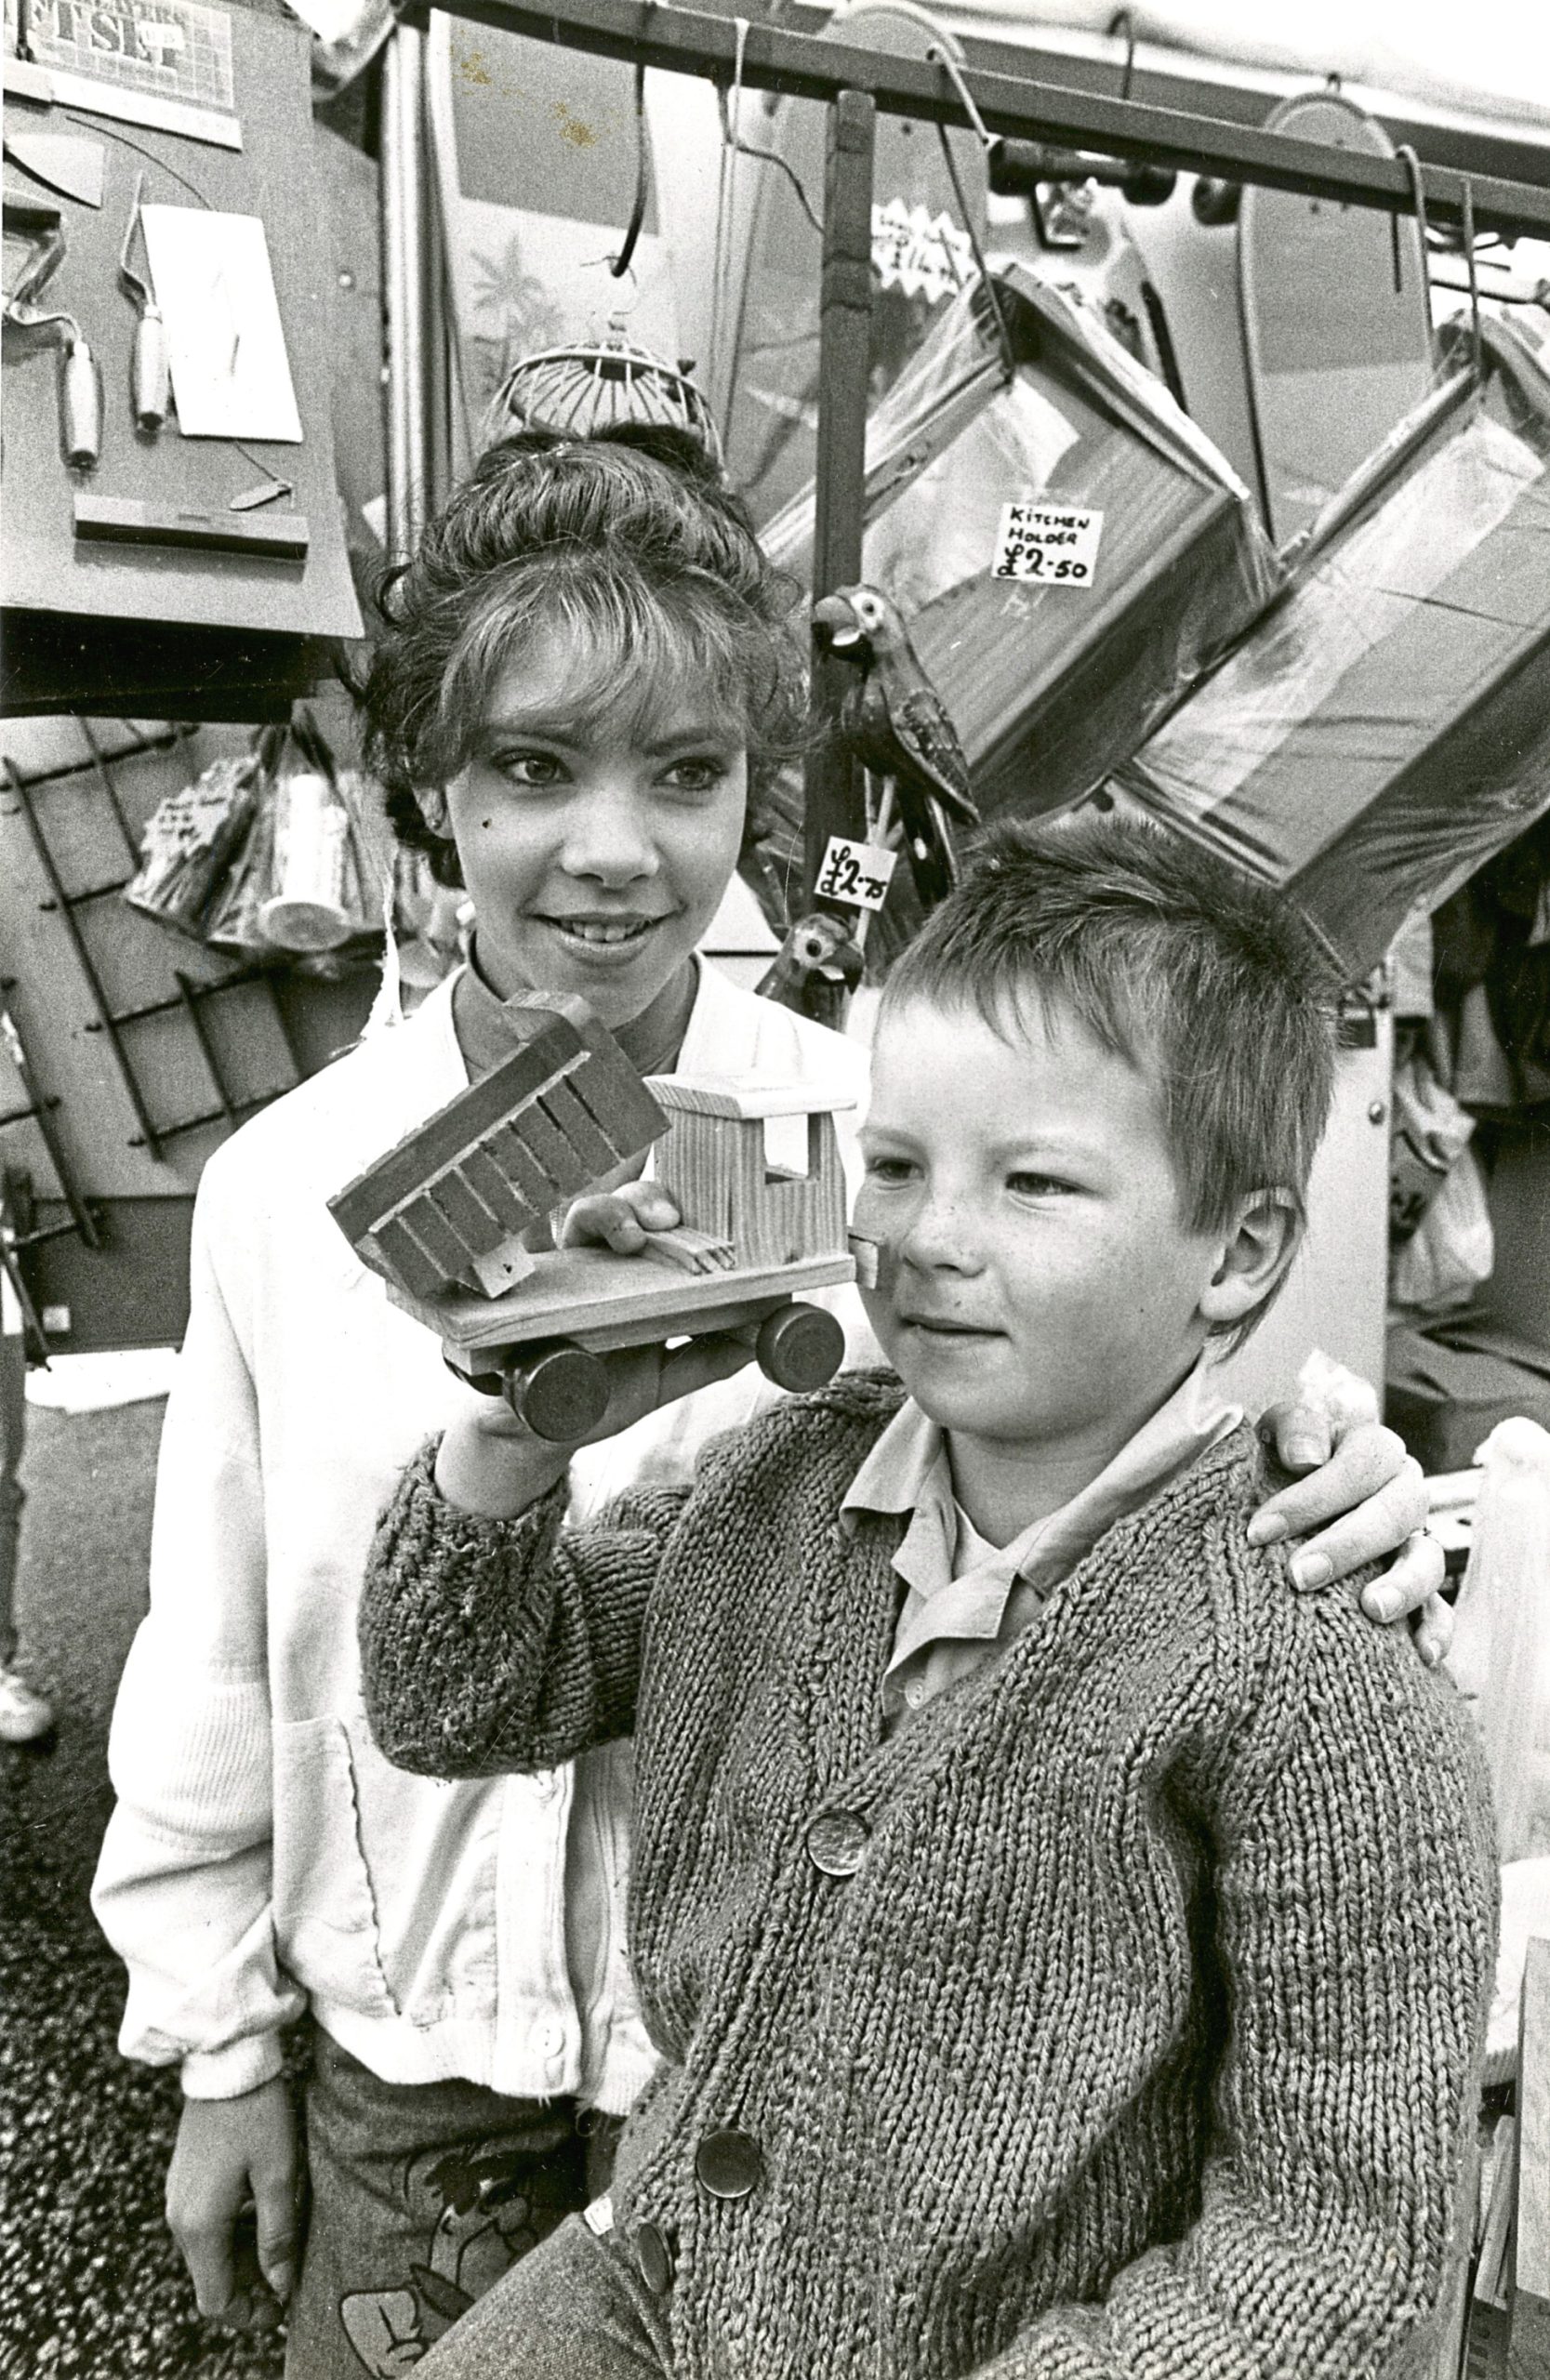 Stuart Shirran (4) holding a wooden dumper truck toy at the Timmer Market in the Castlegate in 1988. With him is assistant Vicky Stewart (16) of Torry.